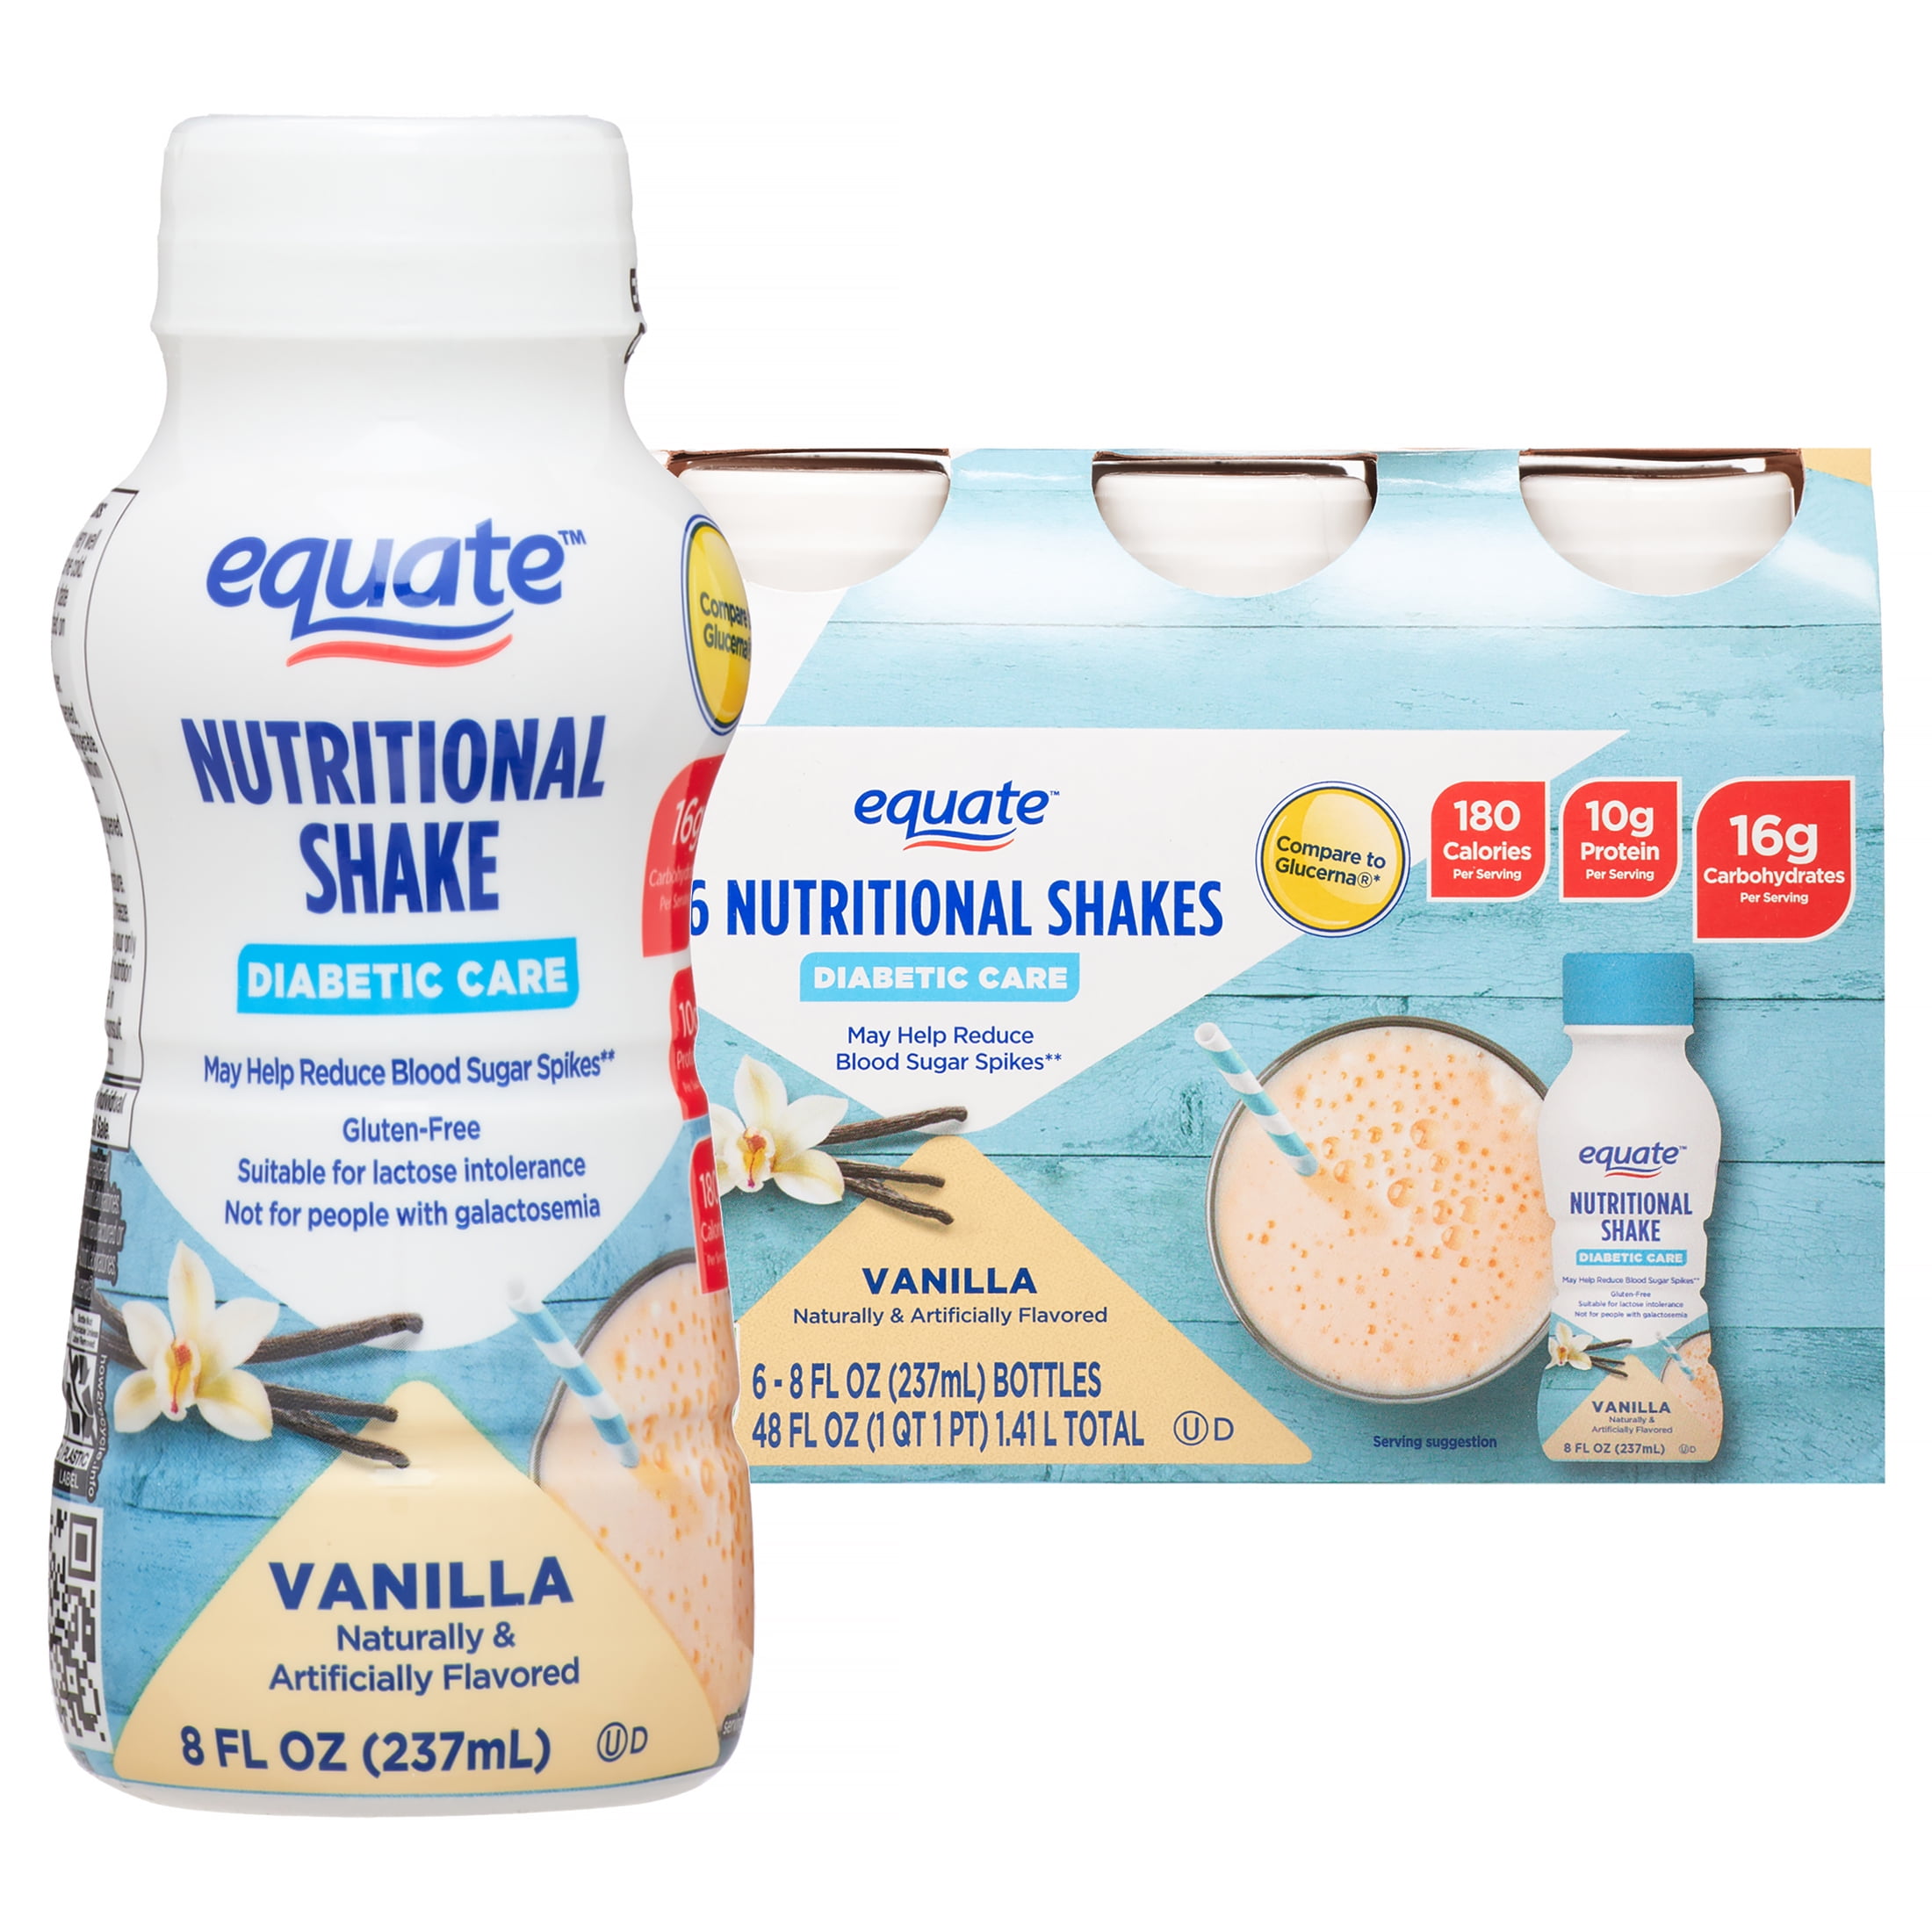 Equate Diabetic Care Nutritional Shakes